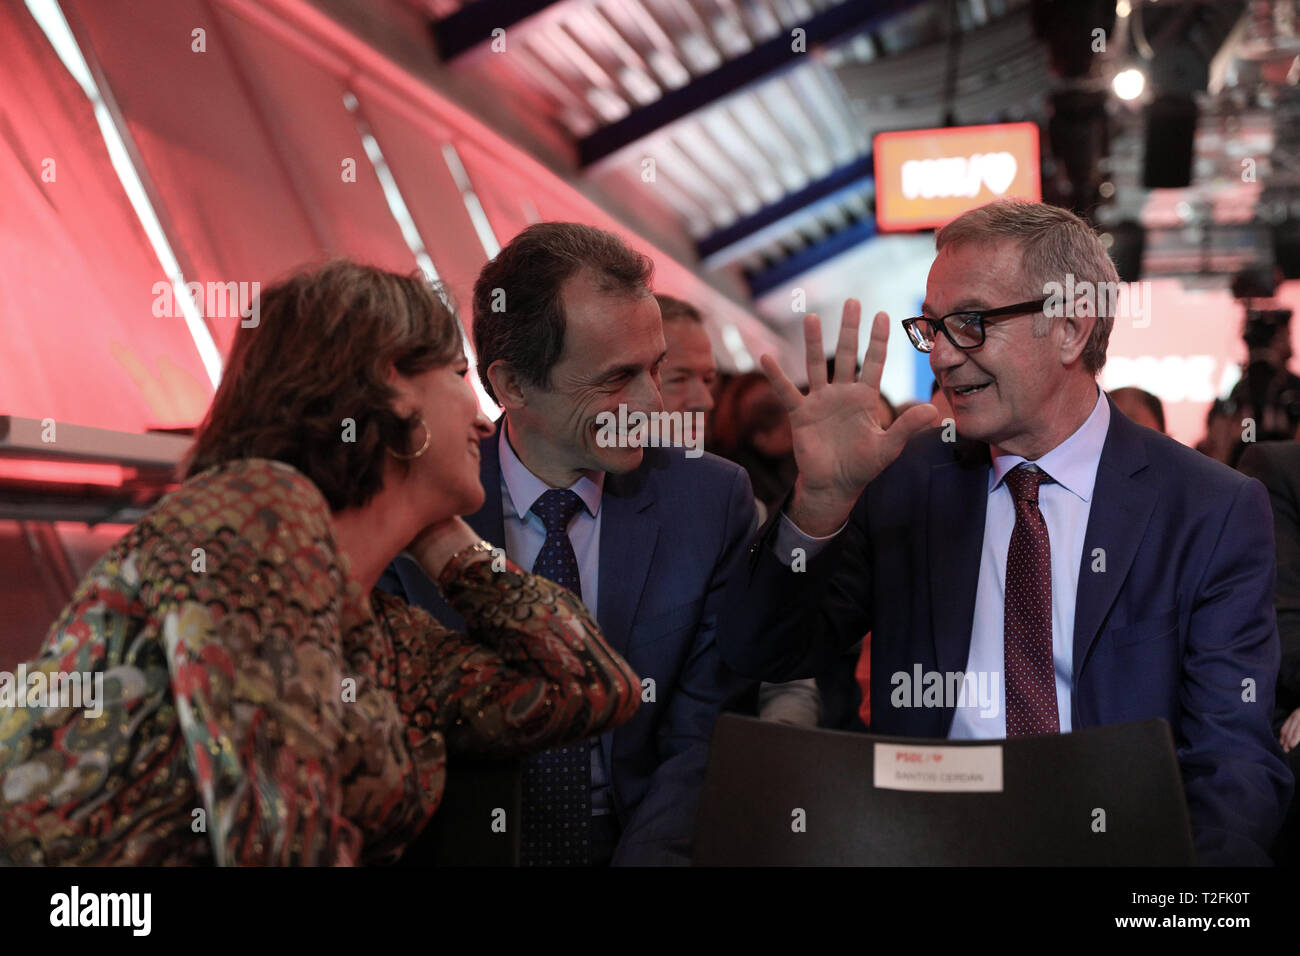 Madrid, Spain. 02nd Apr, 2019. The Ministers Teresa Ribera (L), Pedro Duque andJ osé Guirao(R) seen attending the event to presents the electoral campaign of the Socialists. Credit: Jesús Hellin/Alamy Live News Stock Photo